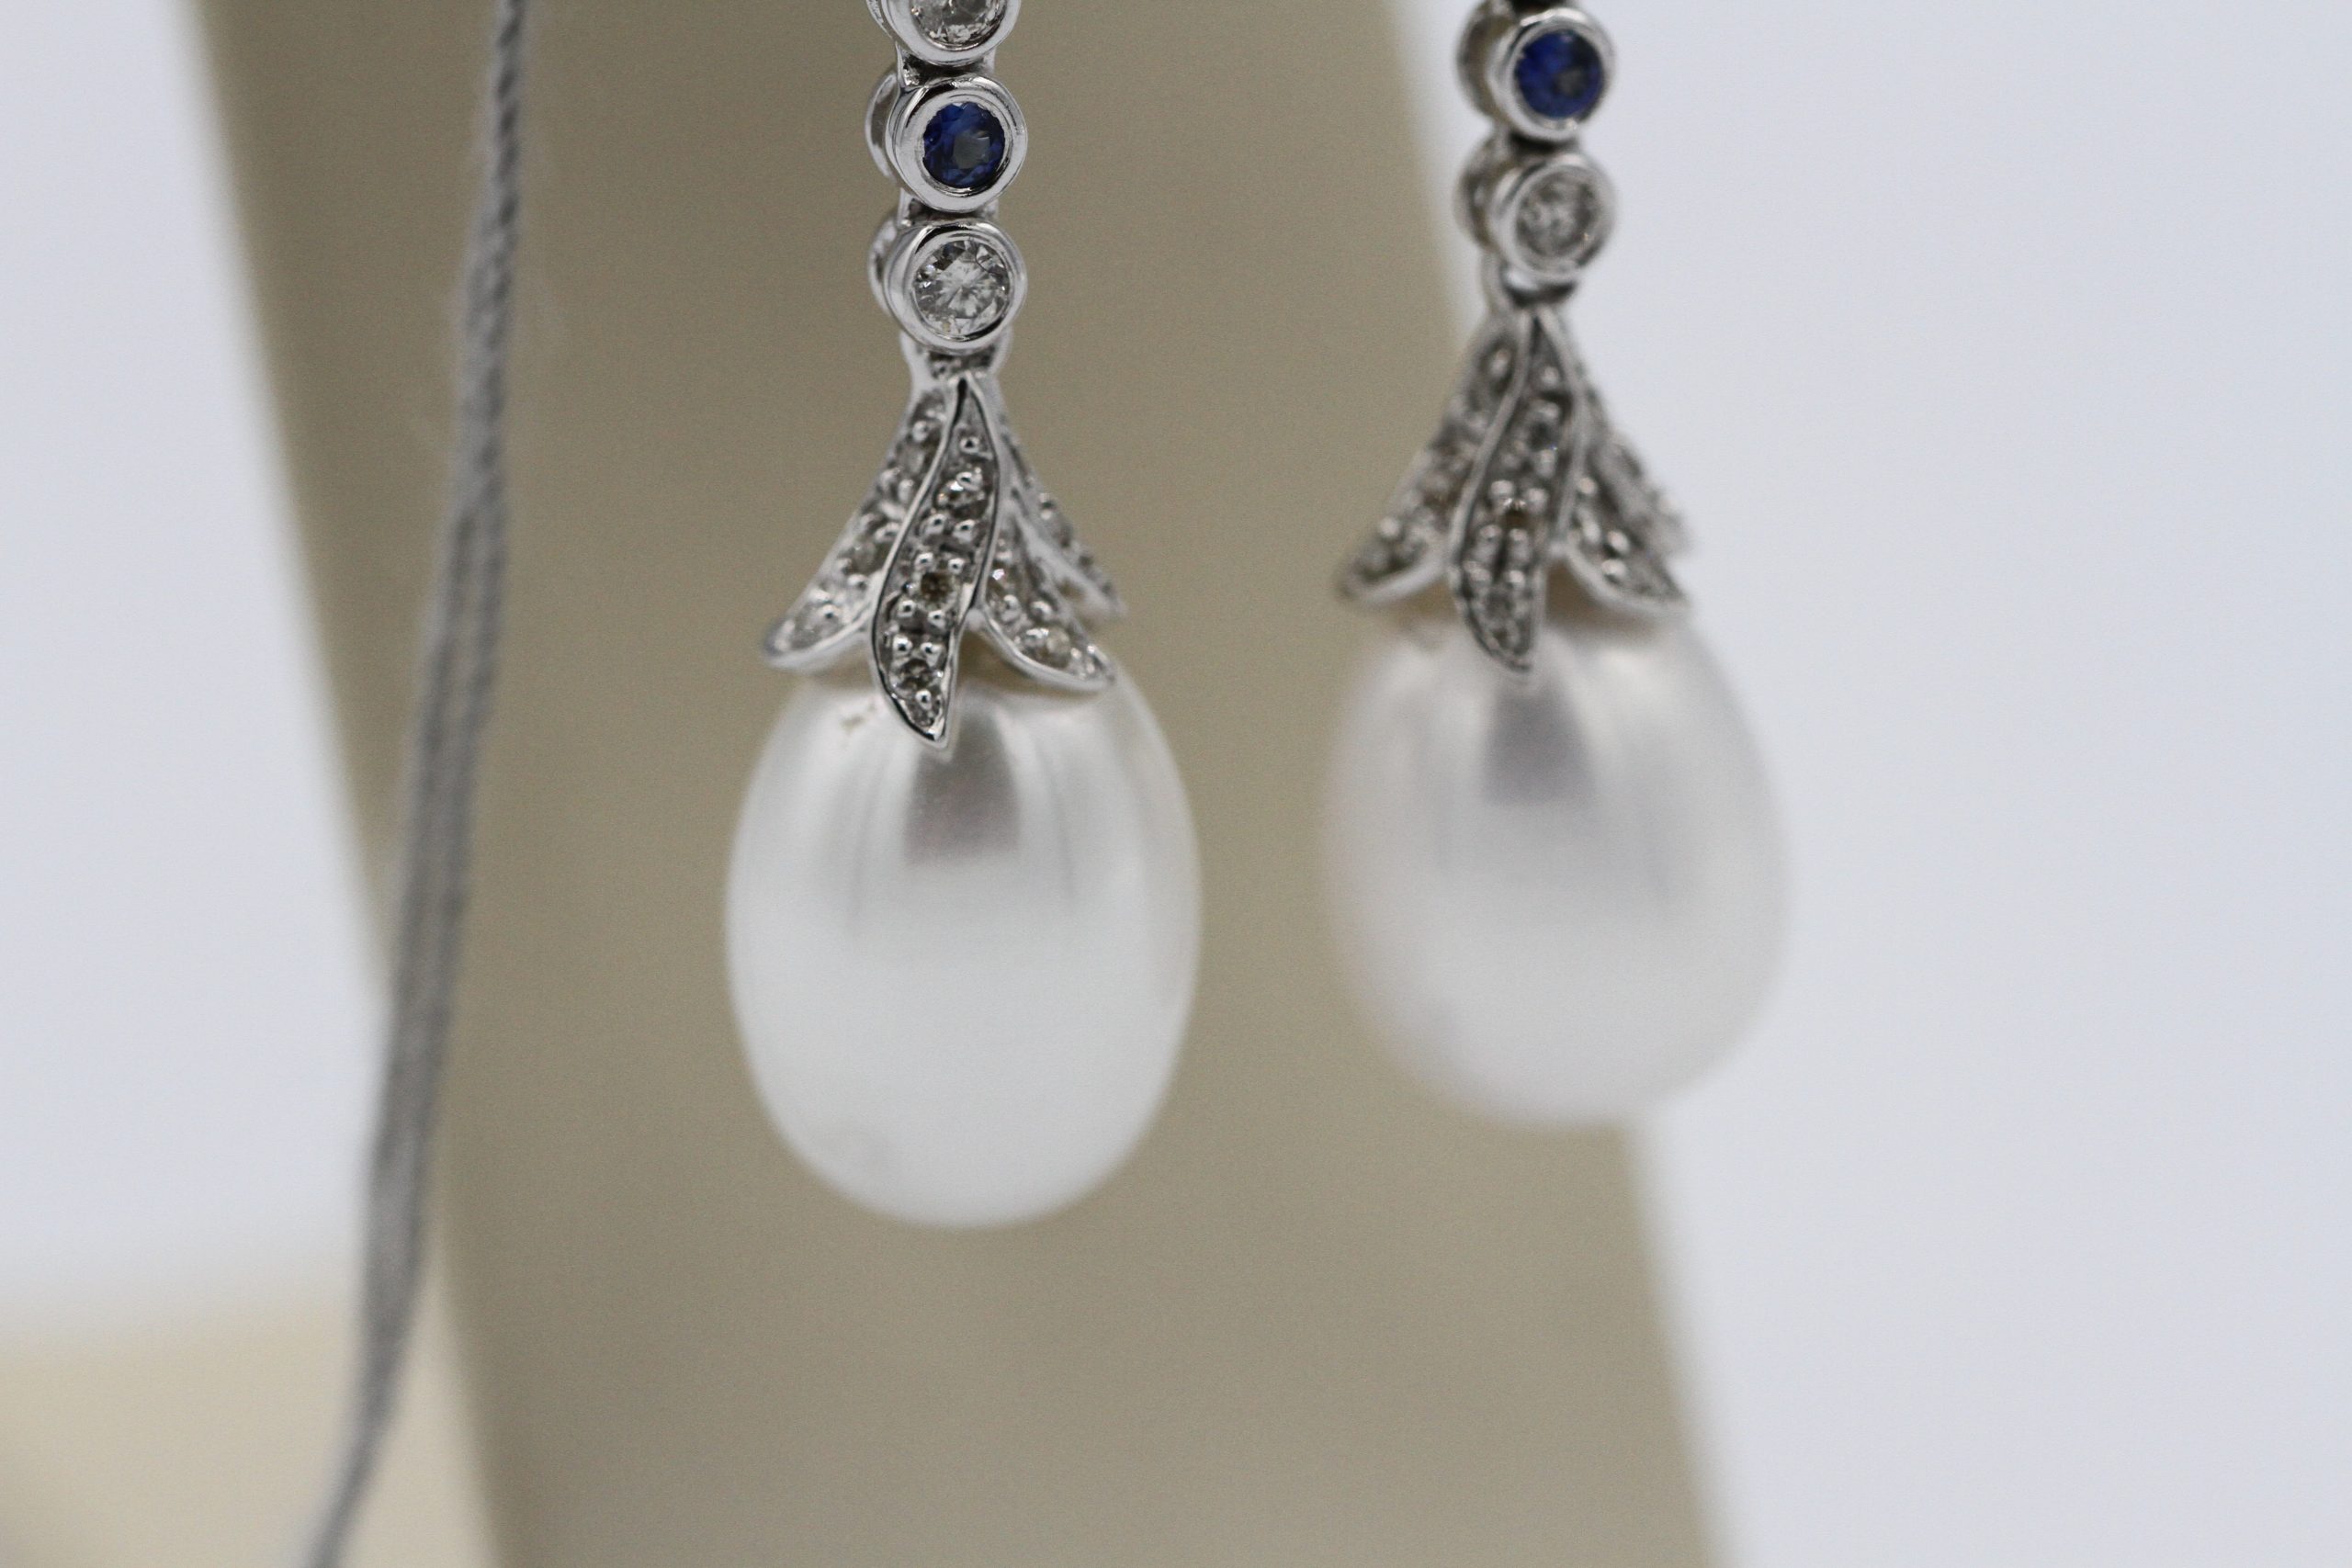 A closeup of some pearl earrings for sale